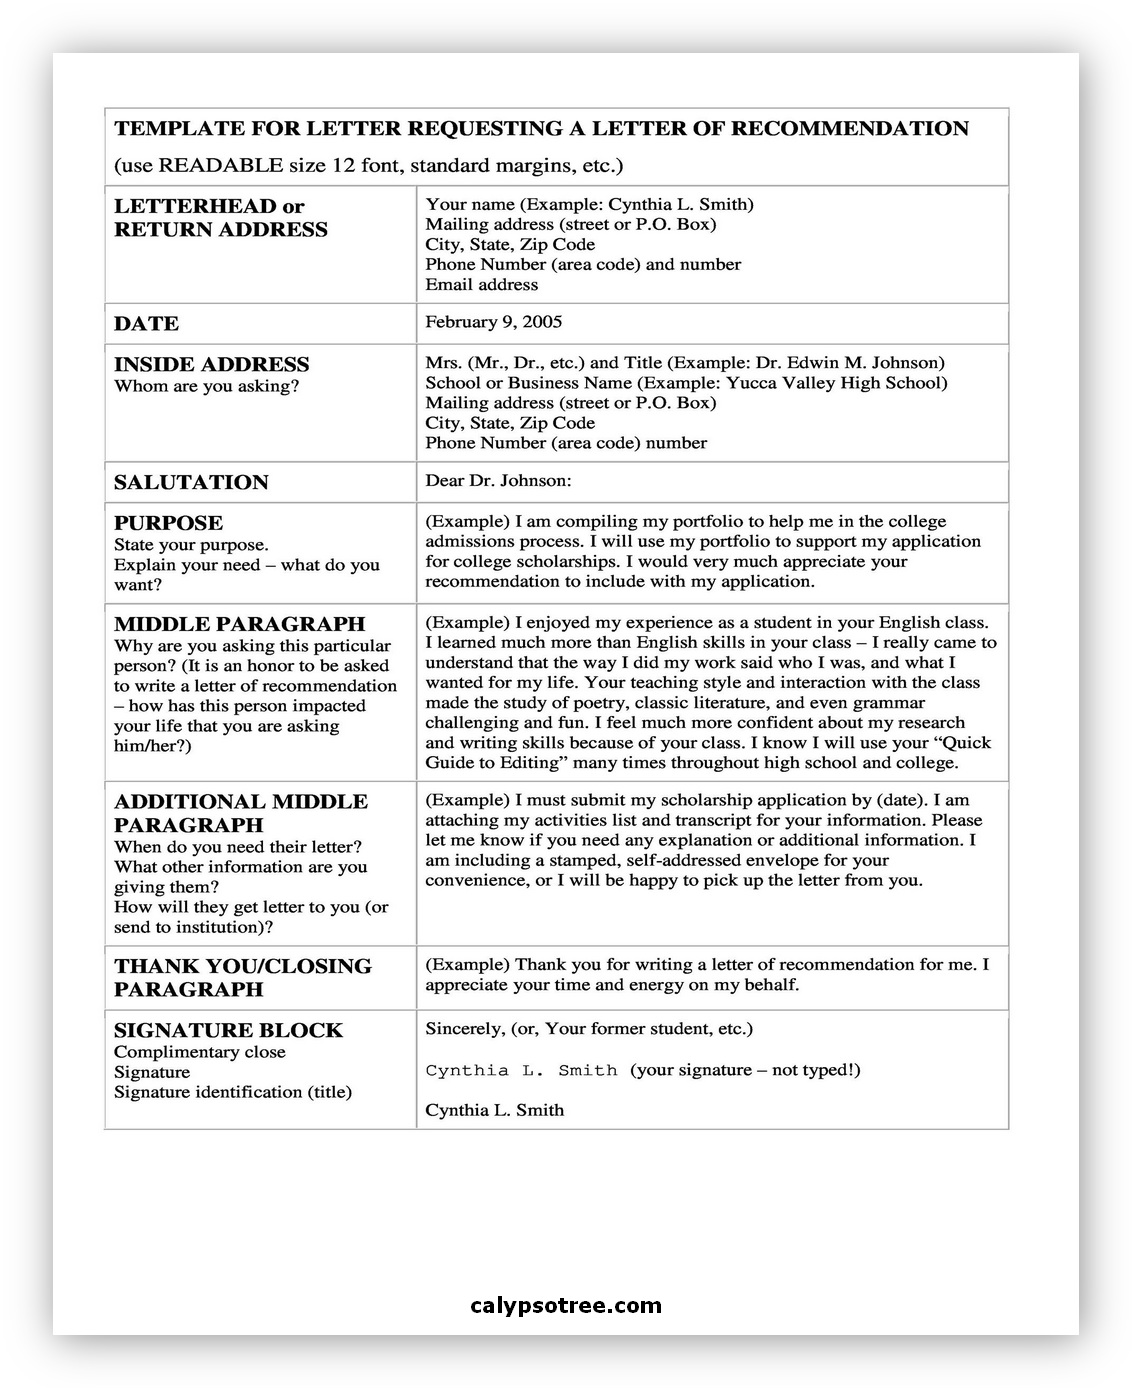 Letter of Recommendation Template 10